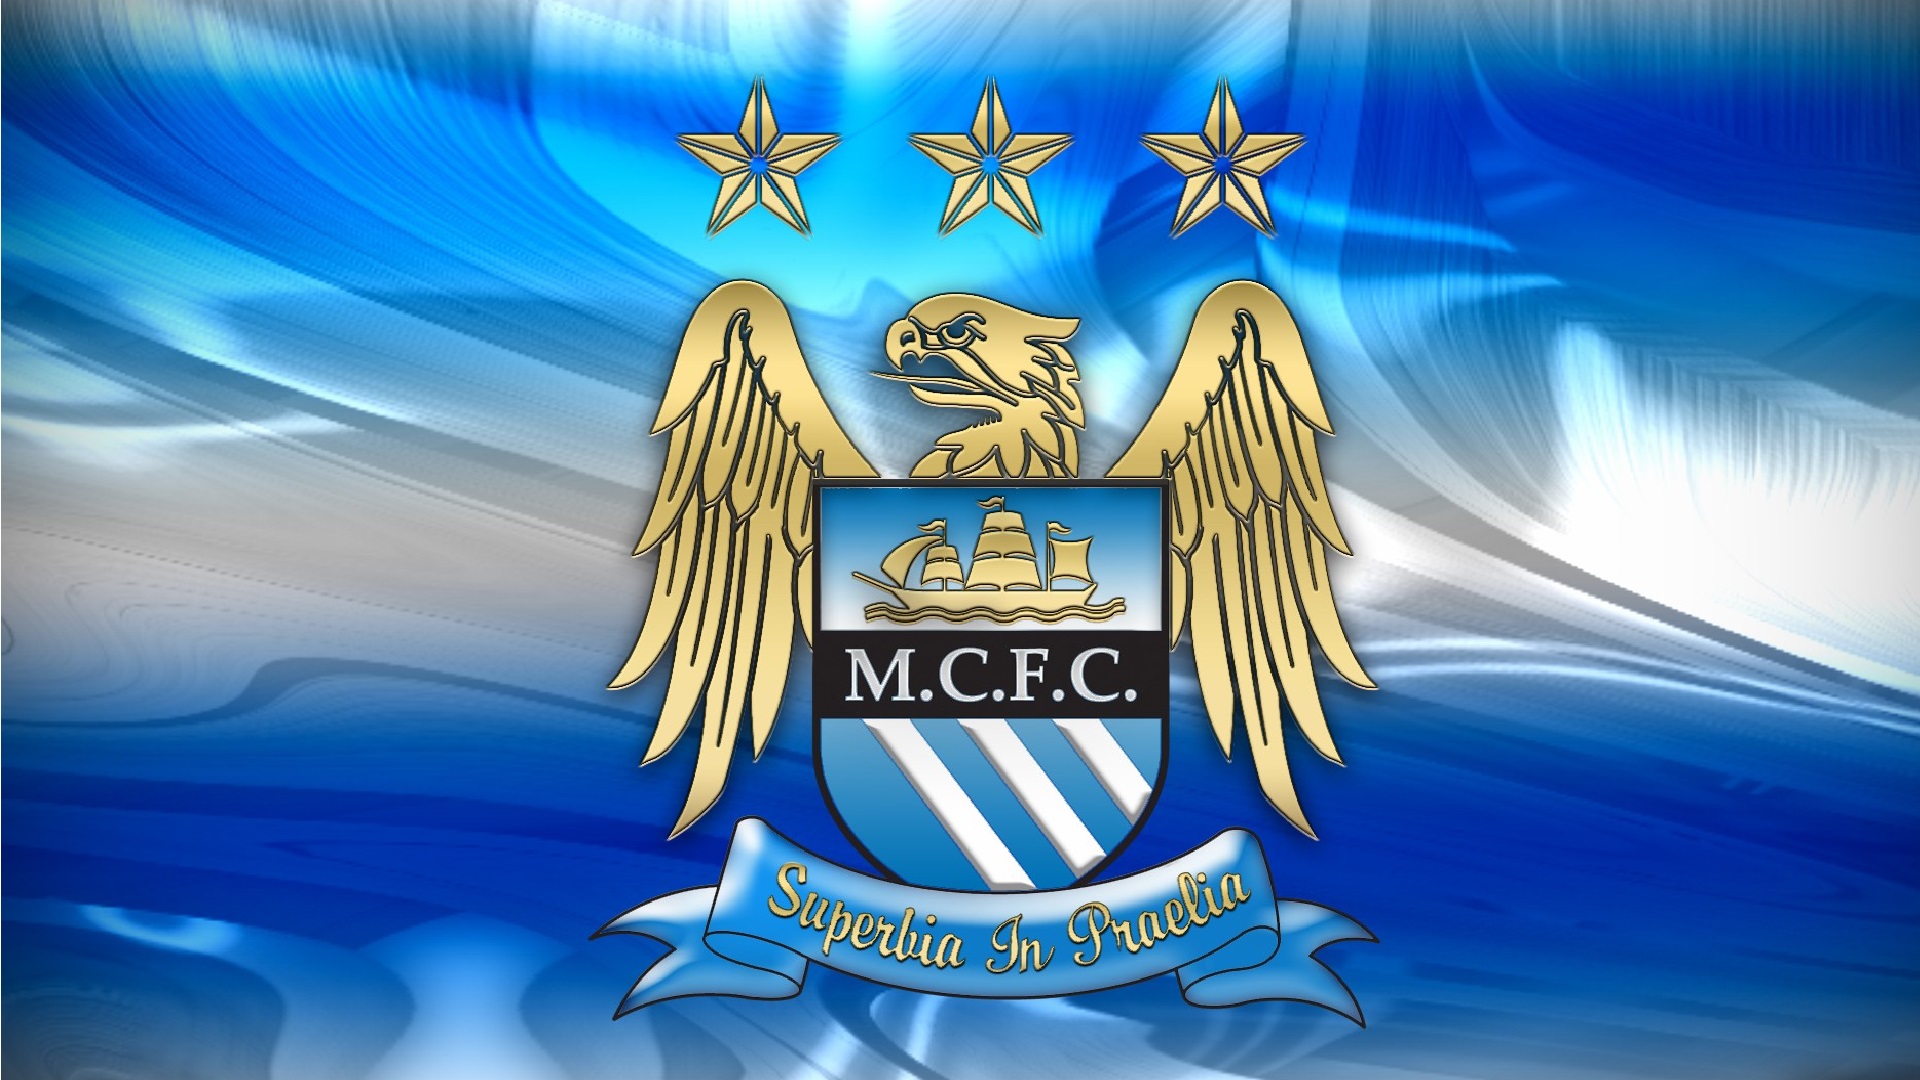 Wallpapers Manchester City With high-resolution 1920X1080 pixel. You can use this wallpaper for your Desktop Computers, Mac Screensavers, Windows Backgrounds, iPhone Wallpapers, Tablet or Android Lock screen and another Mobile device